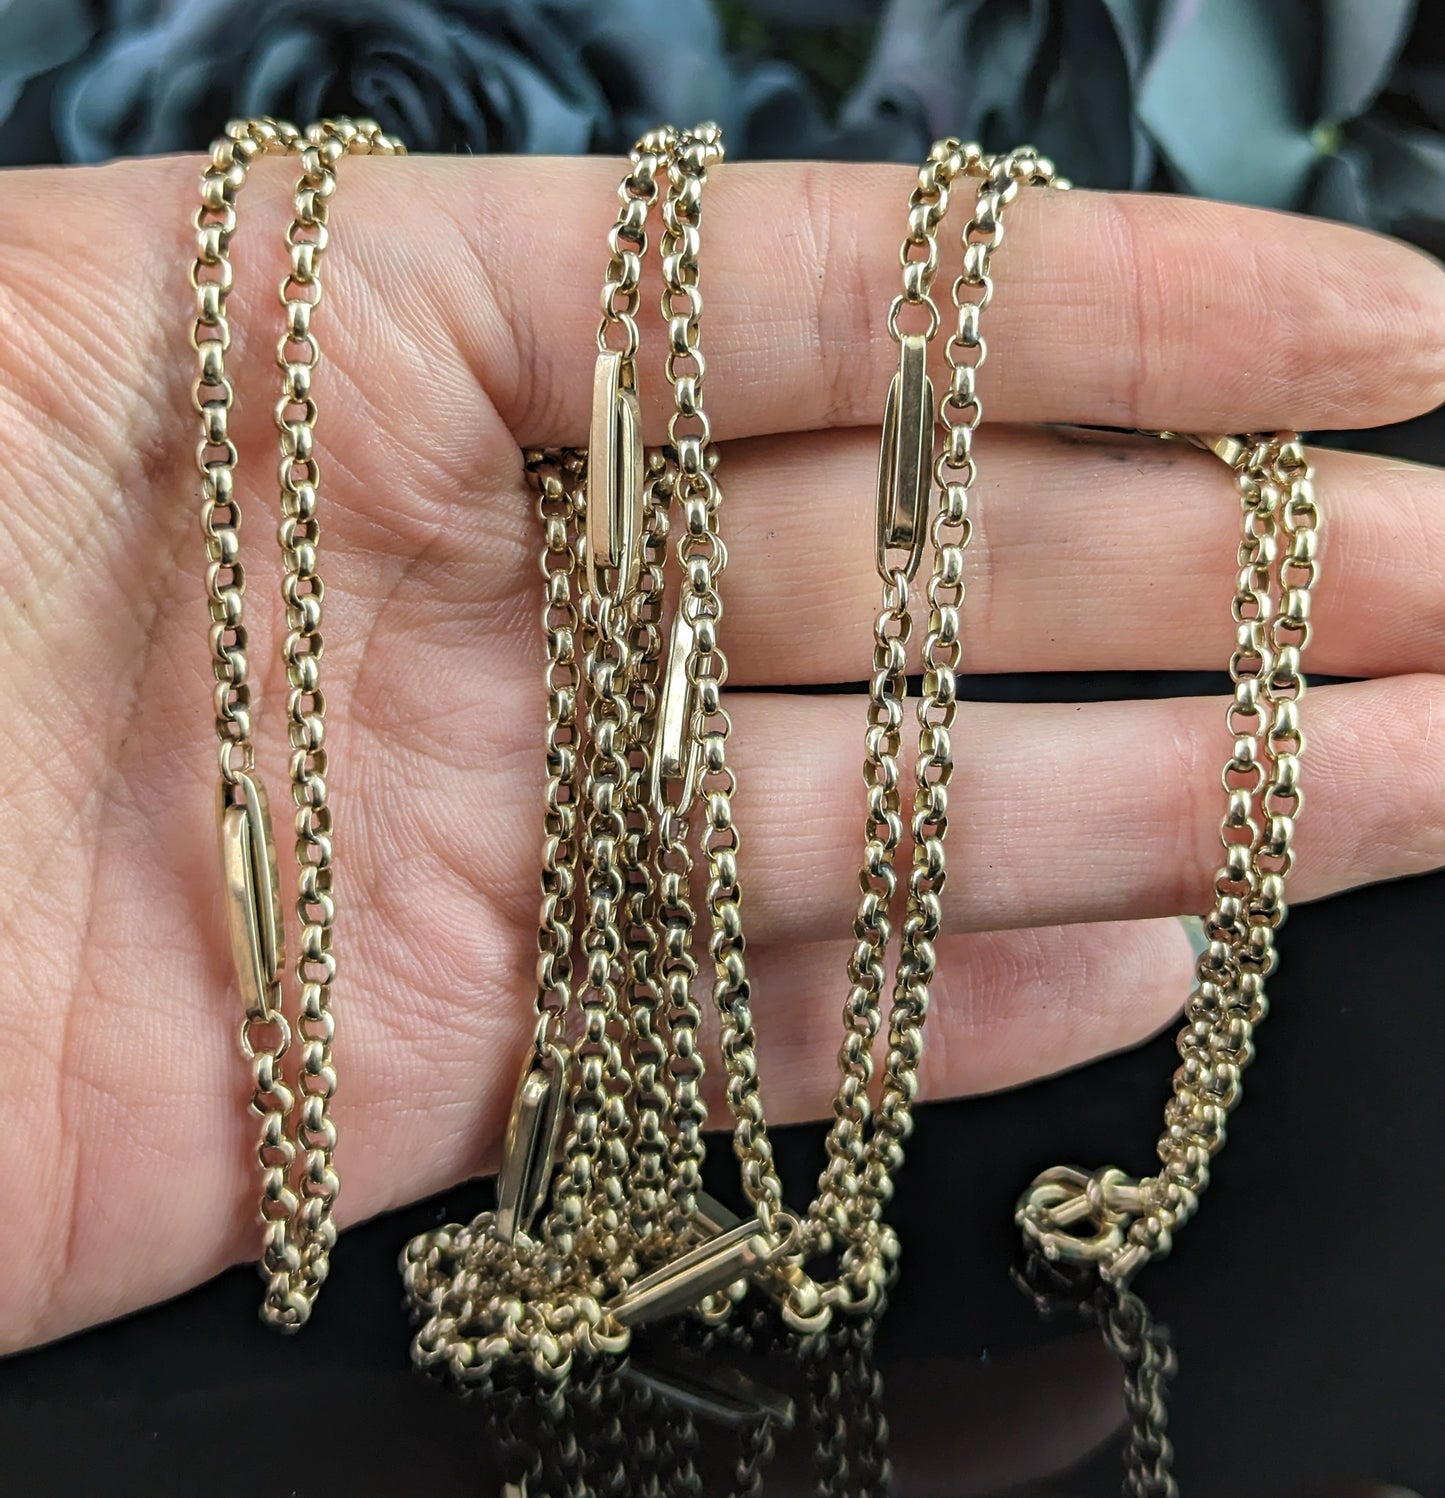 Antique 9ct gold fancy link long chain necklace, guard chain, Victorian